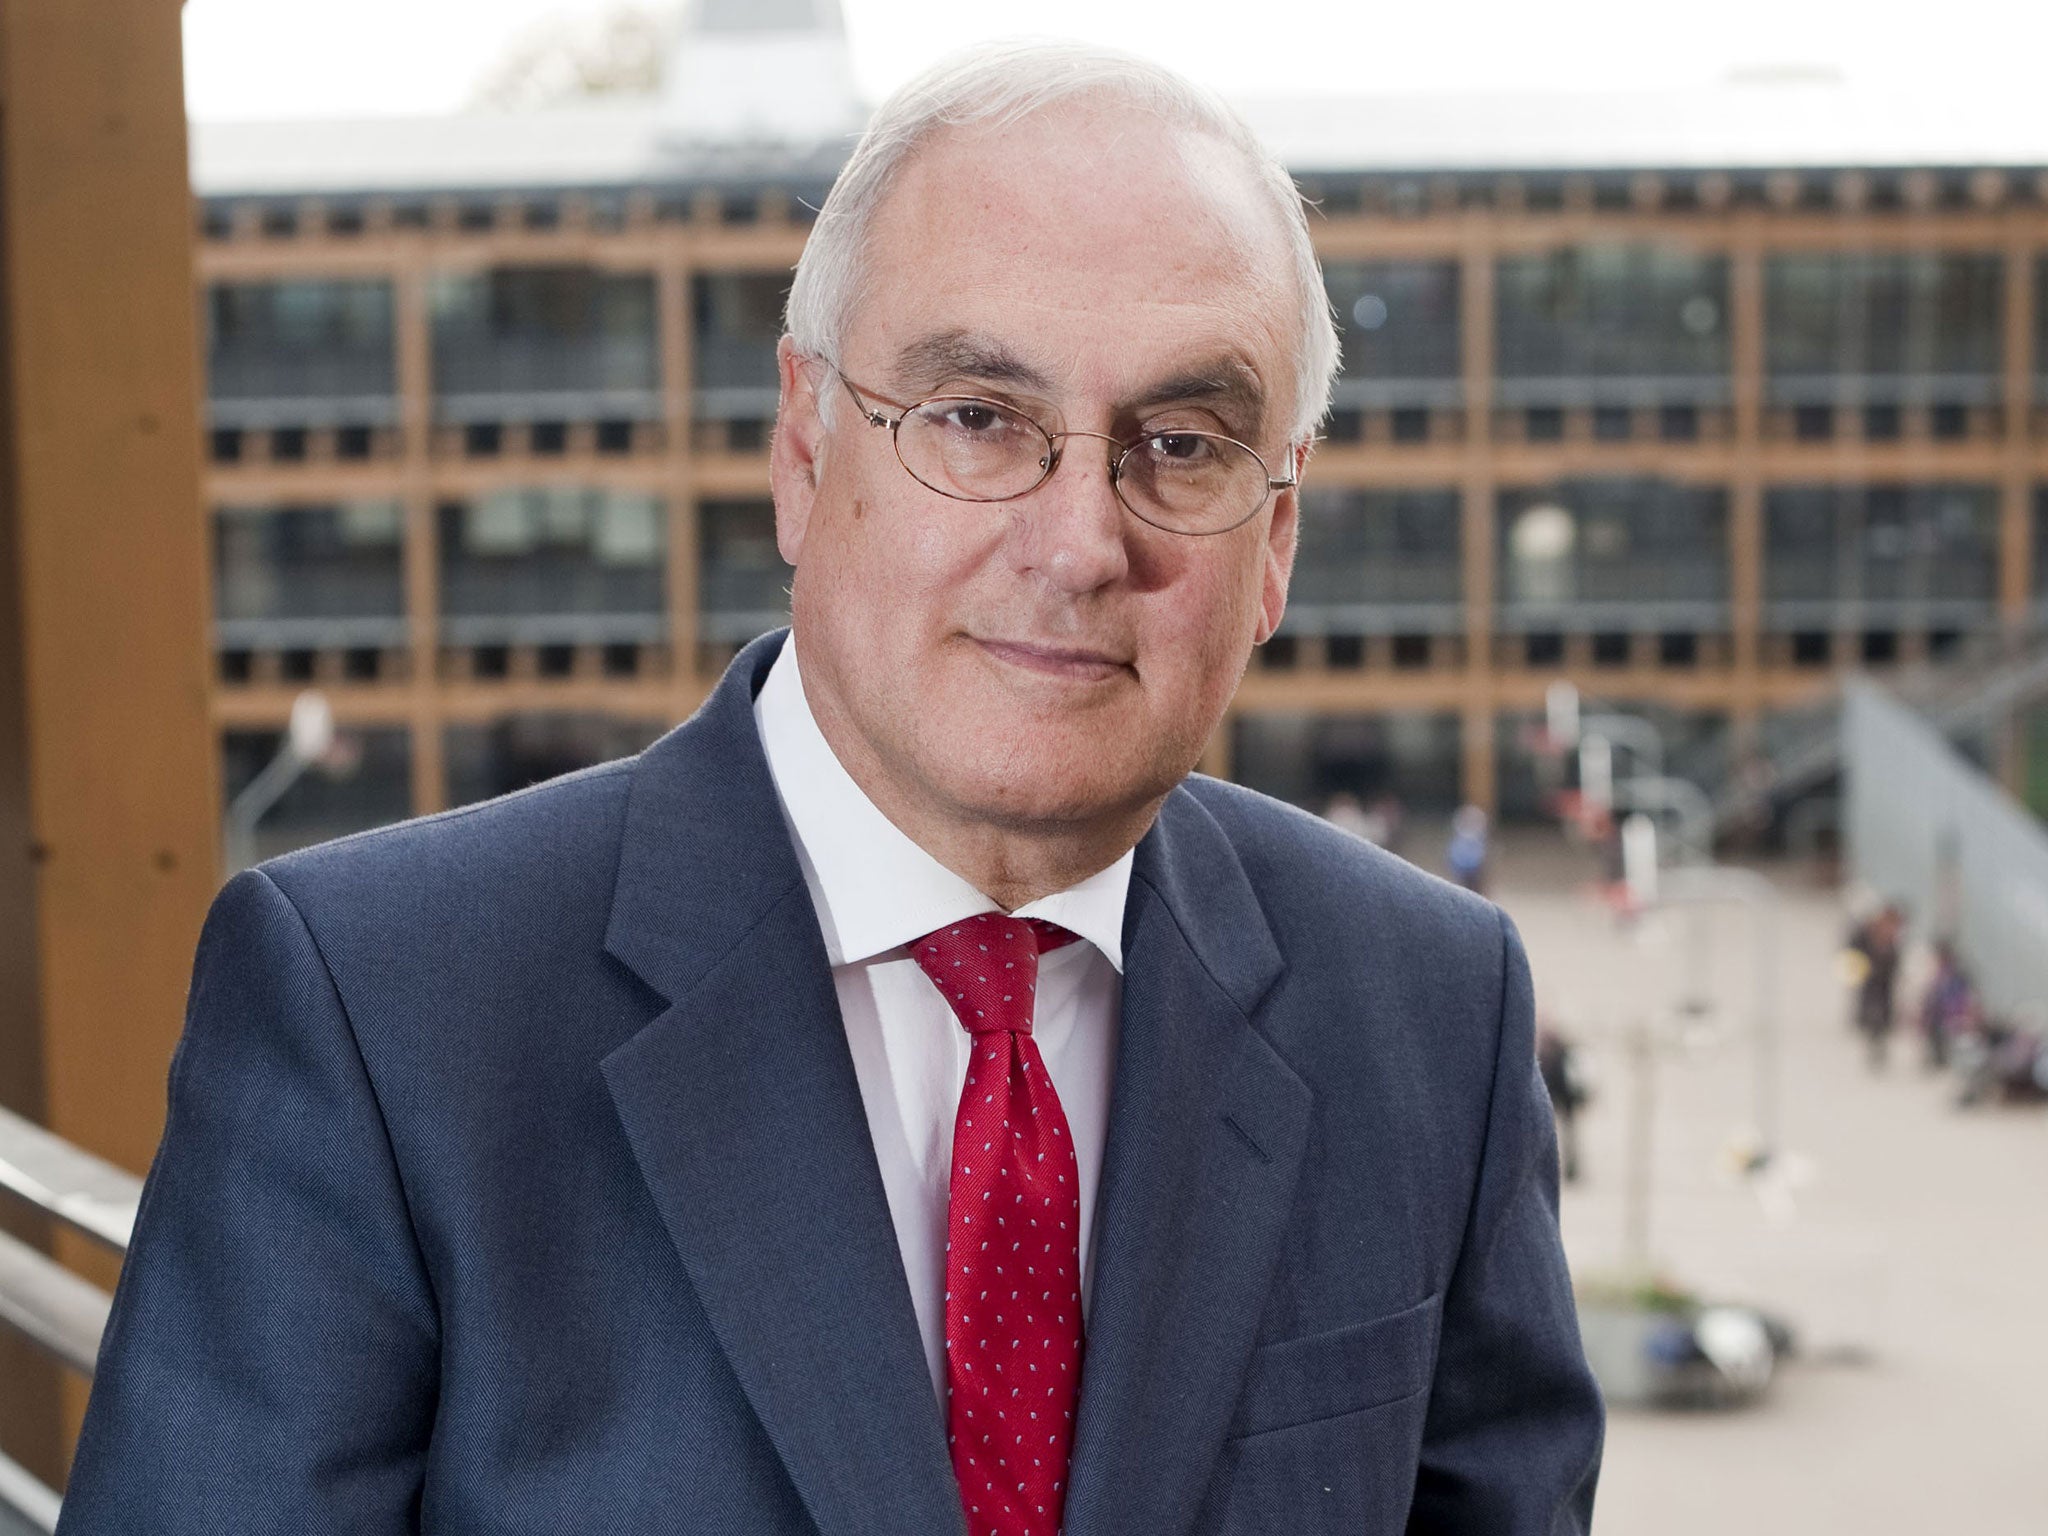 Sir Michael Wilshaw says Ofsted will be taking more notice of schools' careers advice